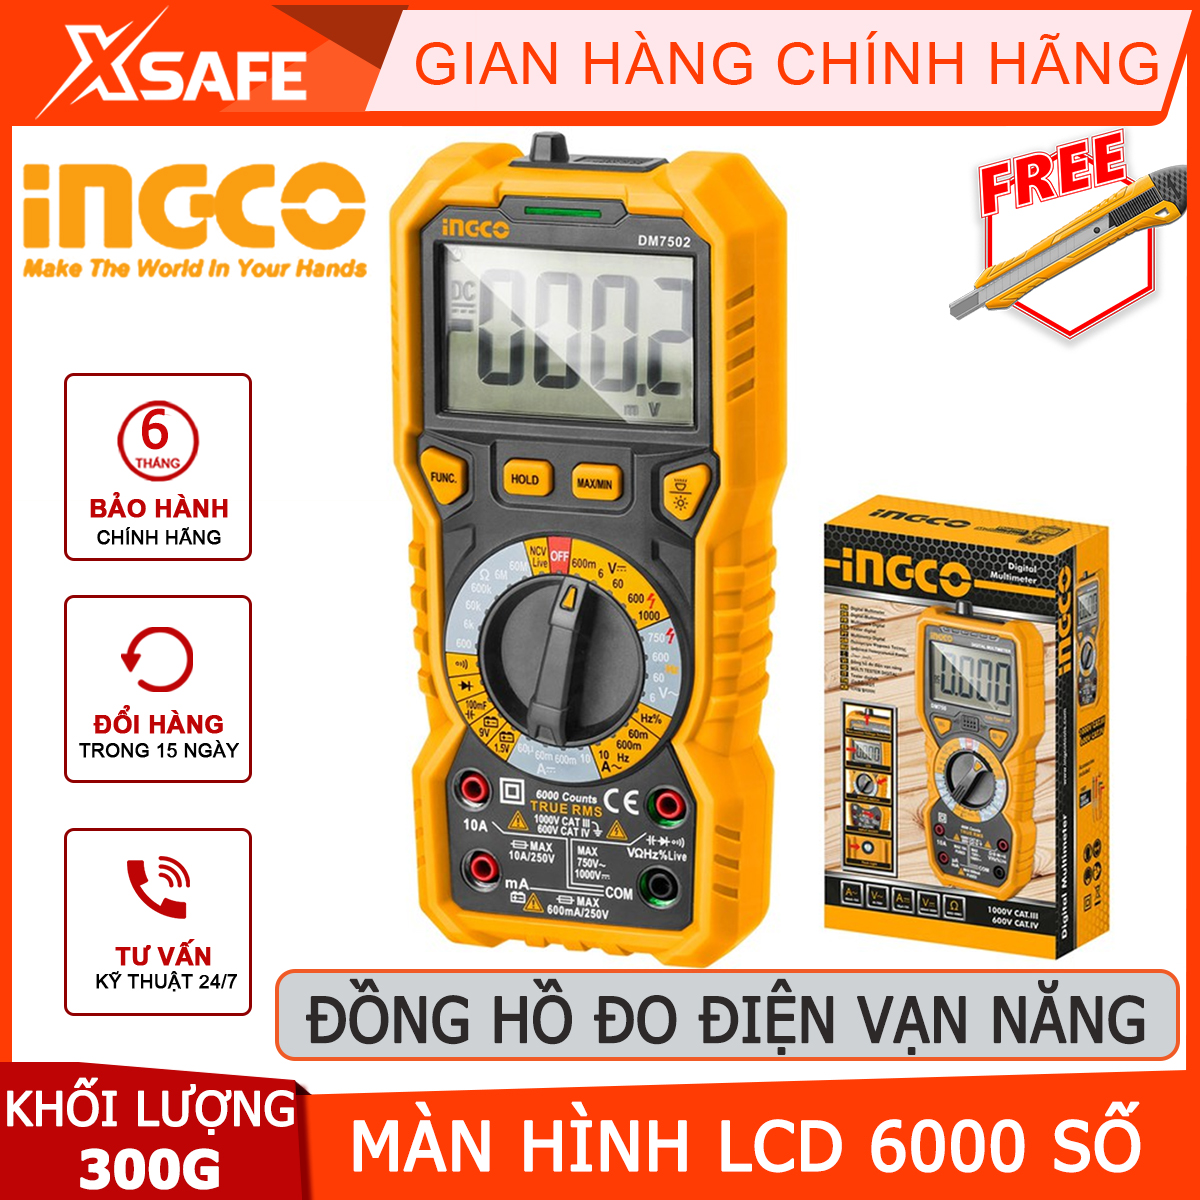 Đồng multimeter digital ingco DM7502 | copper multimeter LCD screen, the Count of 6000 voltage DC 600mv/6V/60V/600V/1000V ±(0.5% + 3) measure voltage, current, AC/DC, measuring frequency and temperature [xsafe] [genuine]